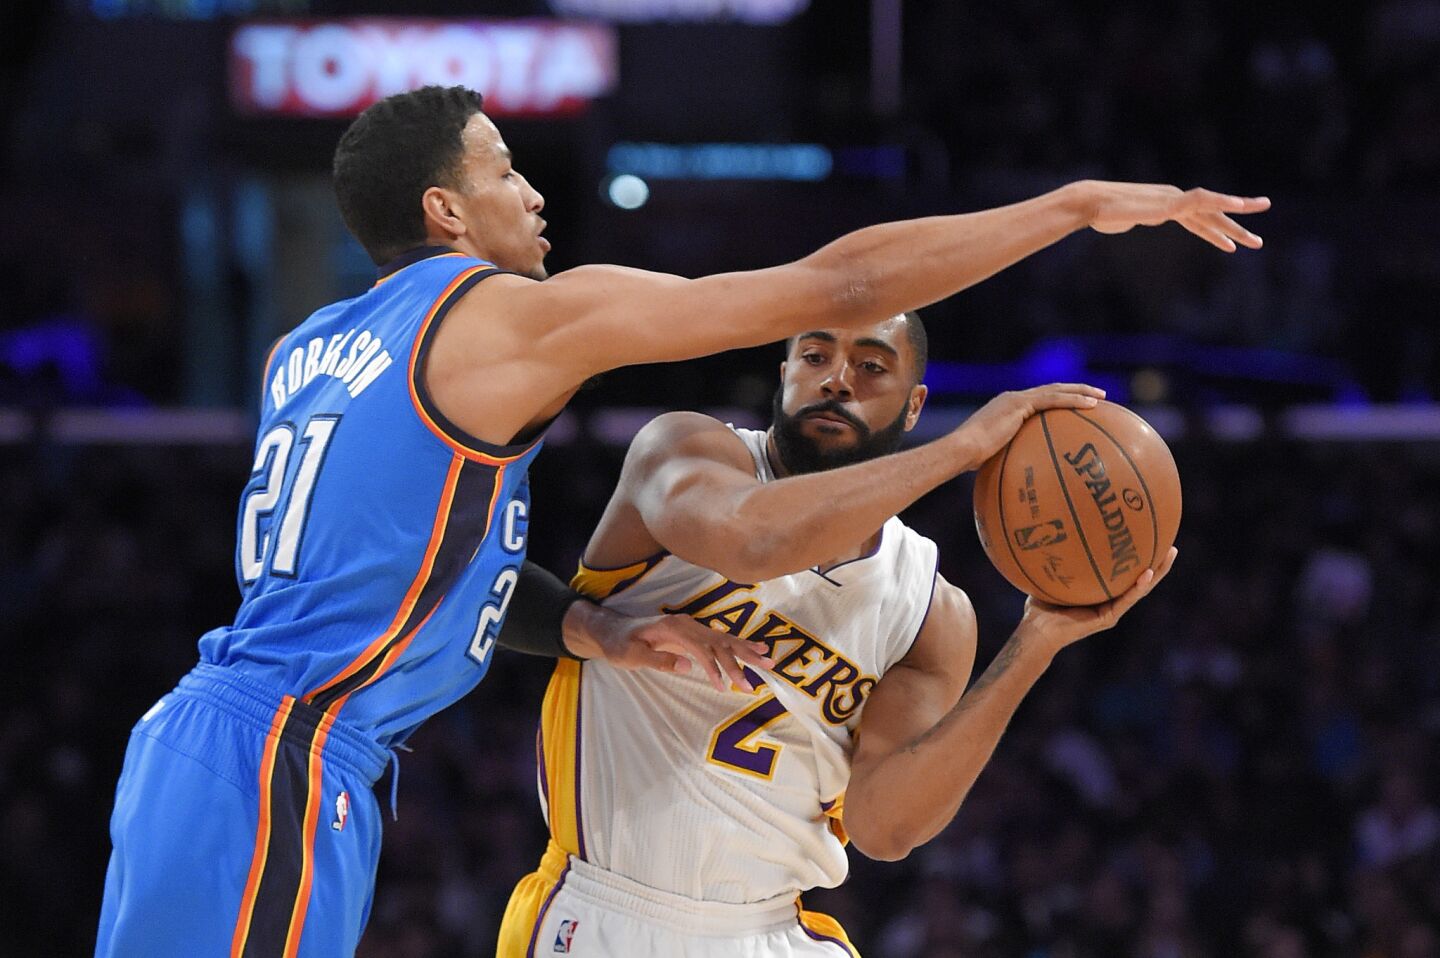 Lakers shooting guard Wayne Ellington tries to pass around Thunder guard Andre Roberson during a March 1 game at Staples Center.